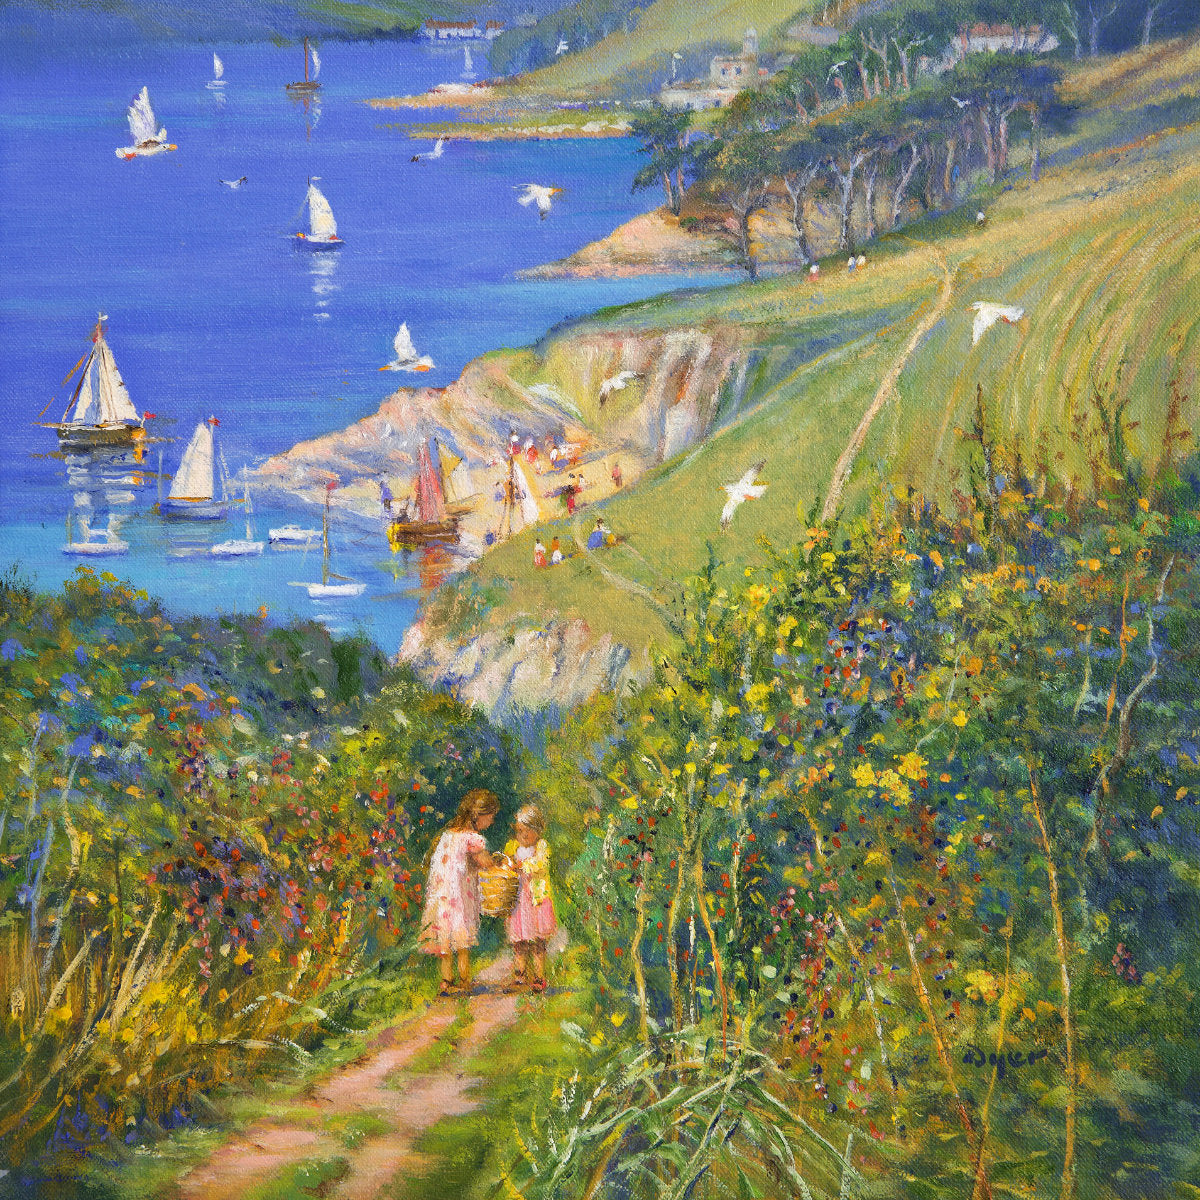 &#39;Blackberry Picking. St Anthony Head&#39;, 20 x 24 inches original art oil on canvas. Paintings of Cornwall by Cornish Artist Ted Dyer from our Cornwall Art Gallery